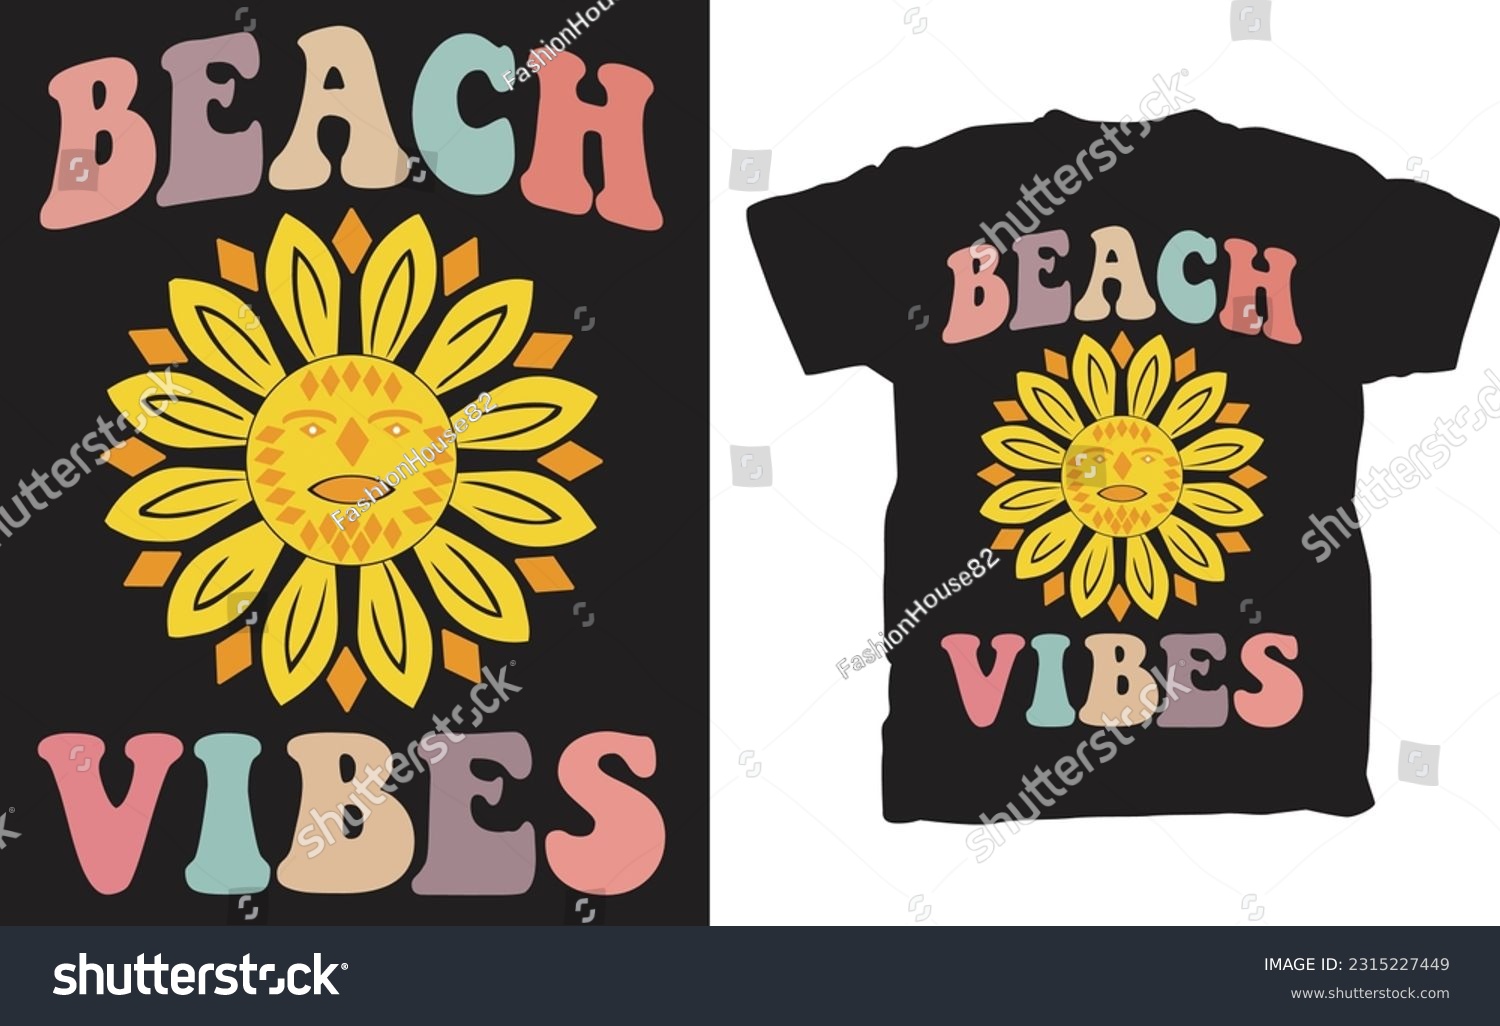 SVG of Embrace the carefree and nostalgic spirit of the beach with the 